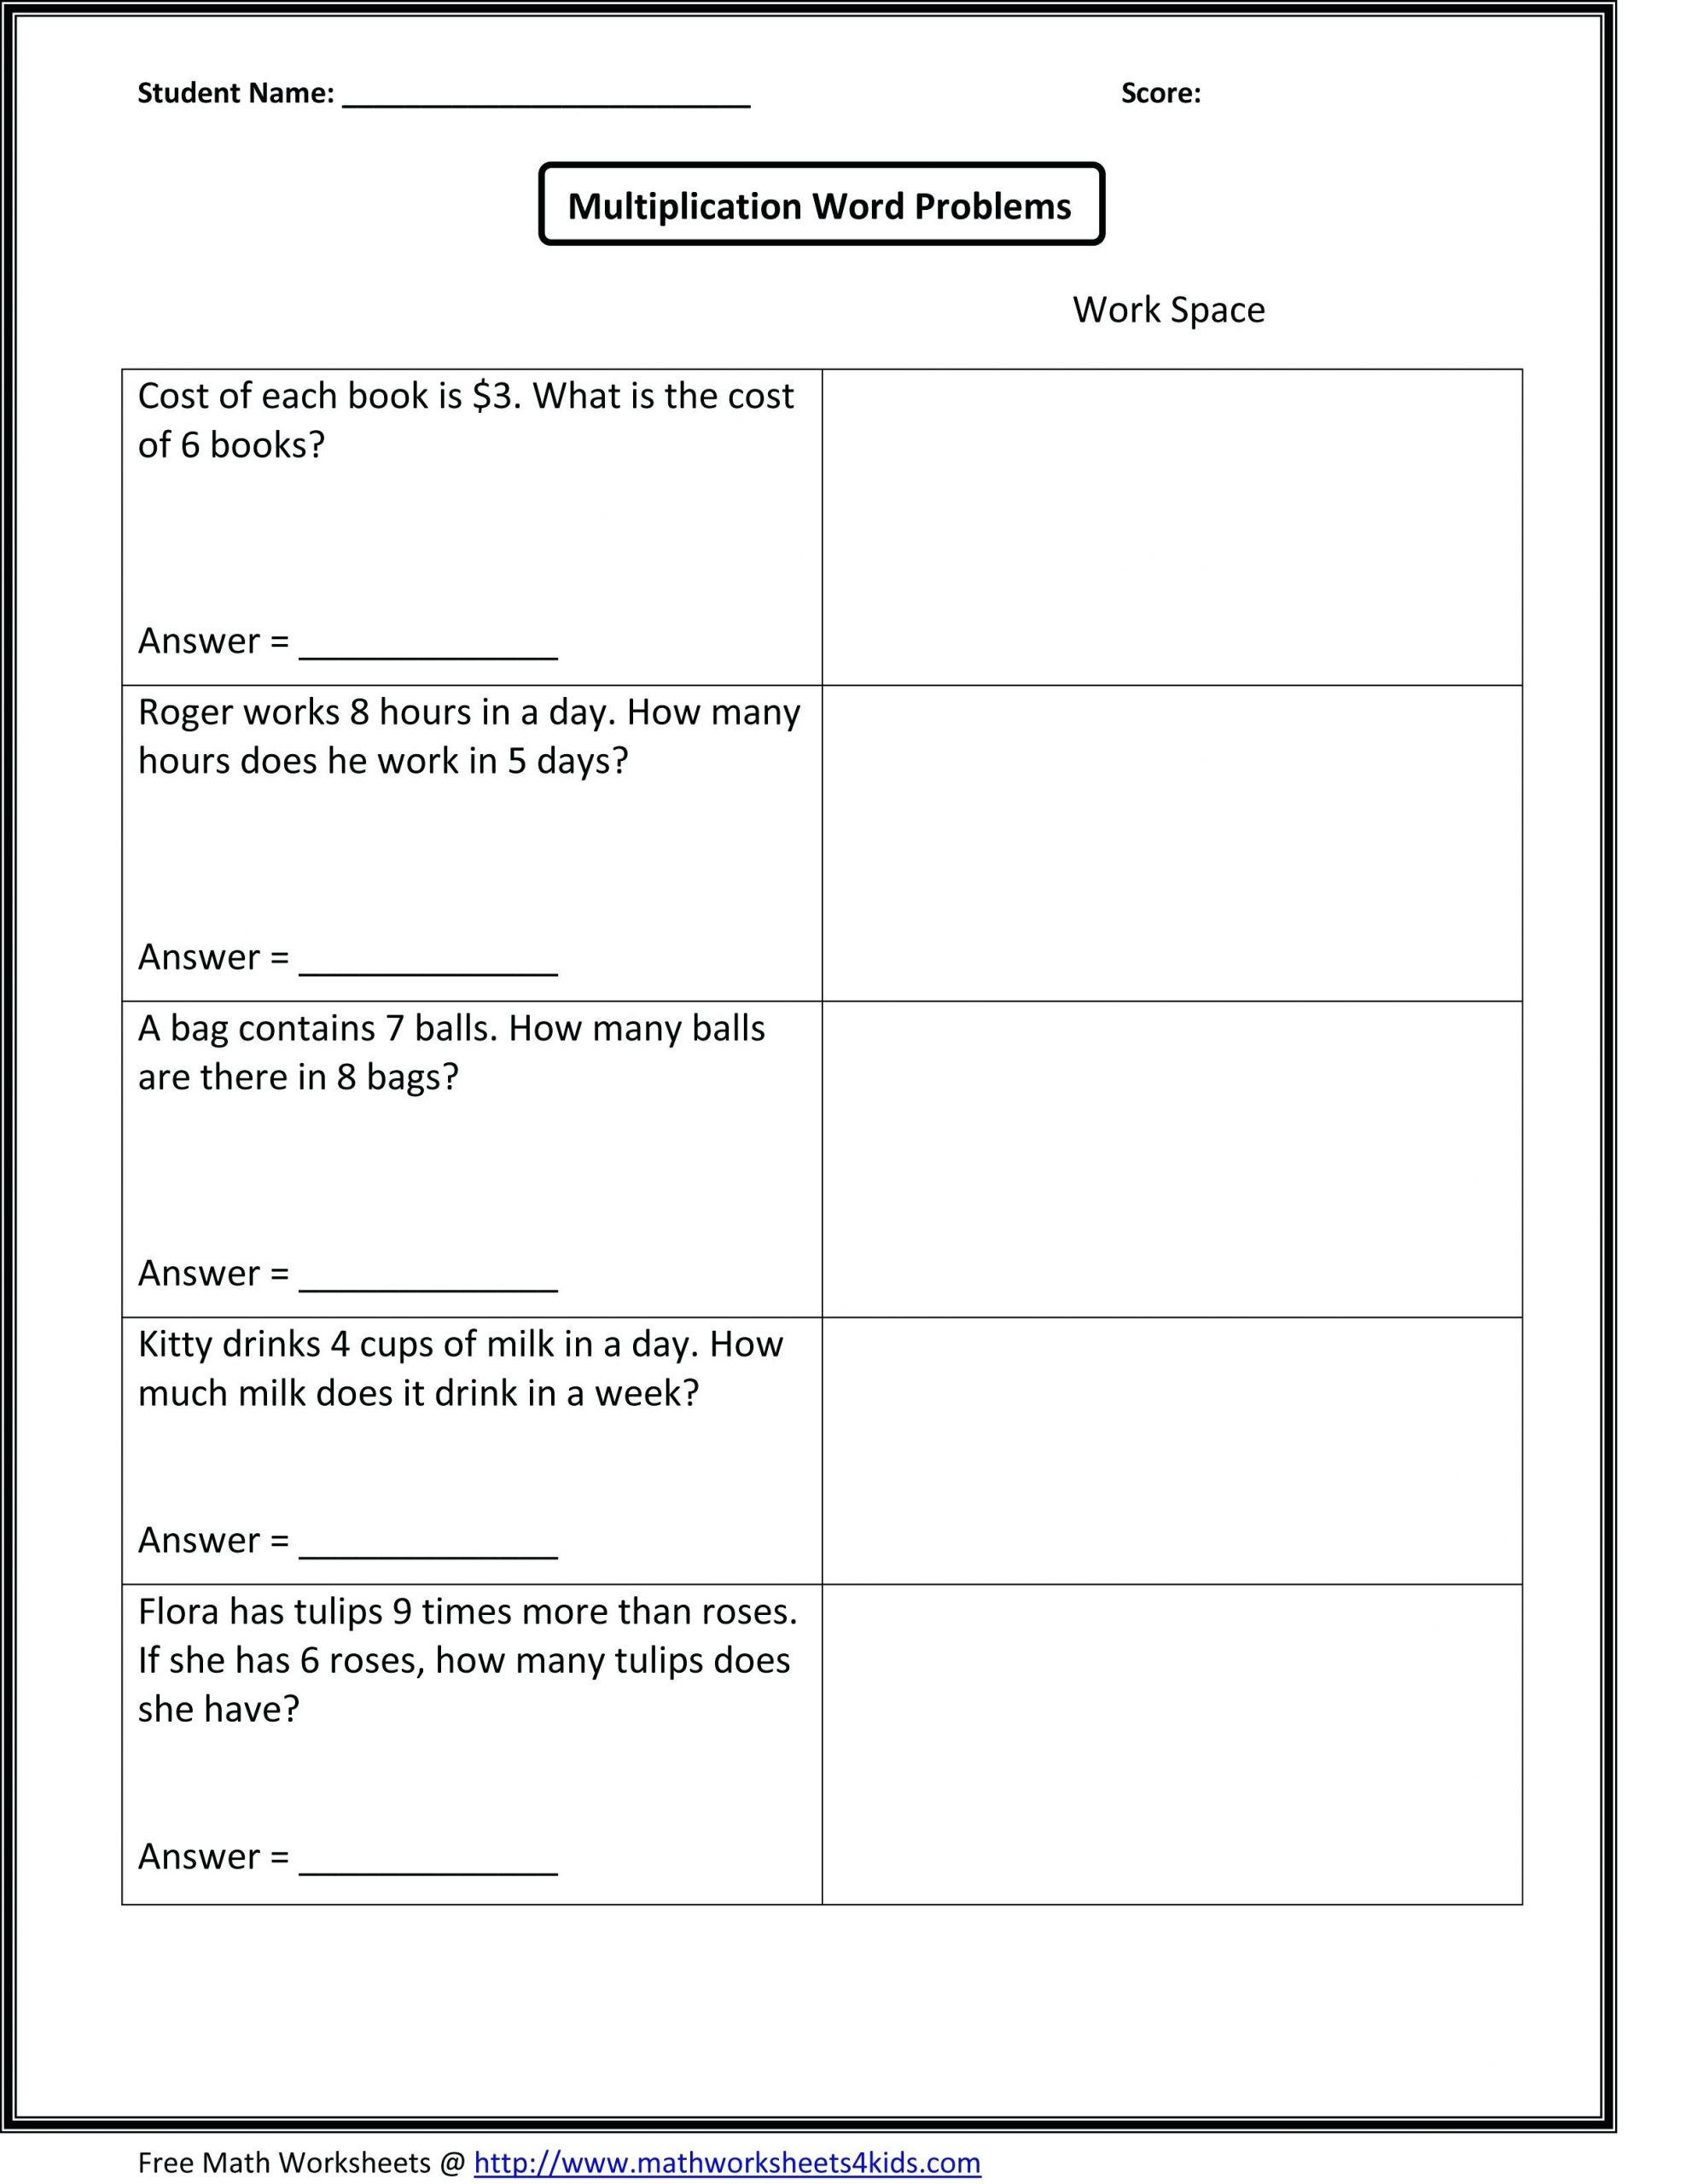 Free Math Worksheets Third Grade 3 Multiplication Multiply whole Tens by whole Tens